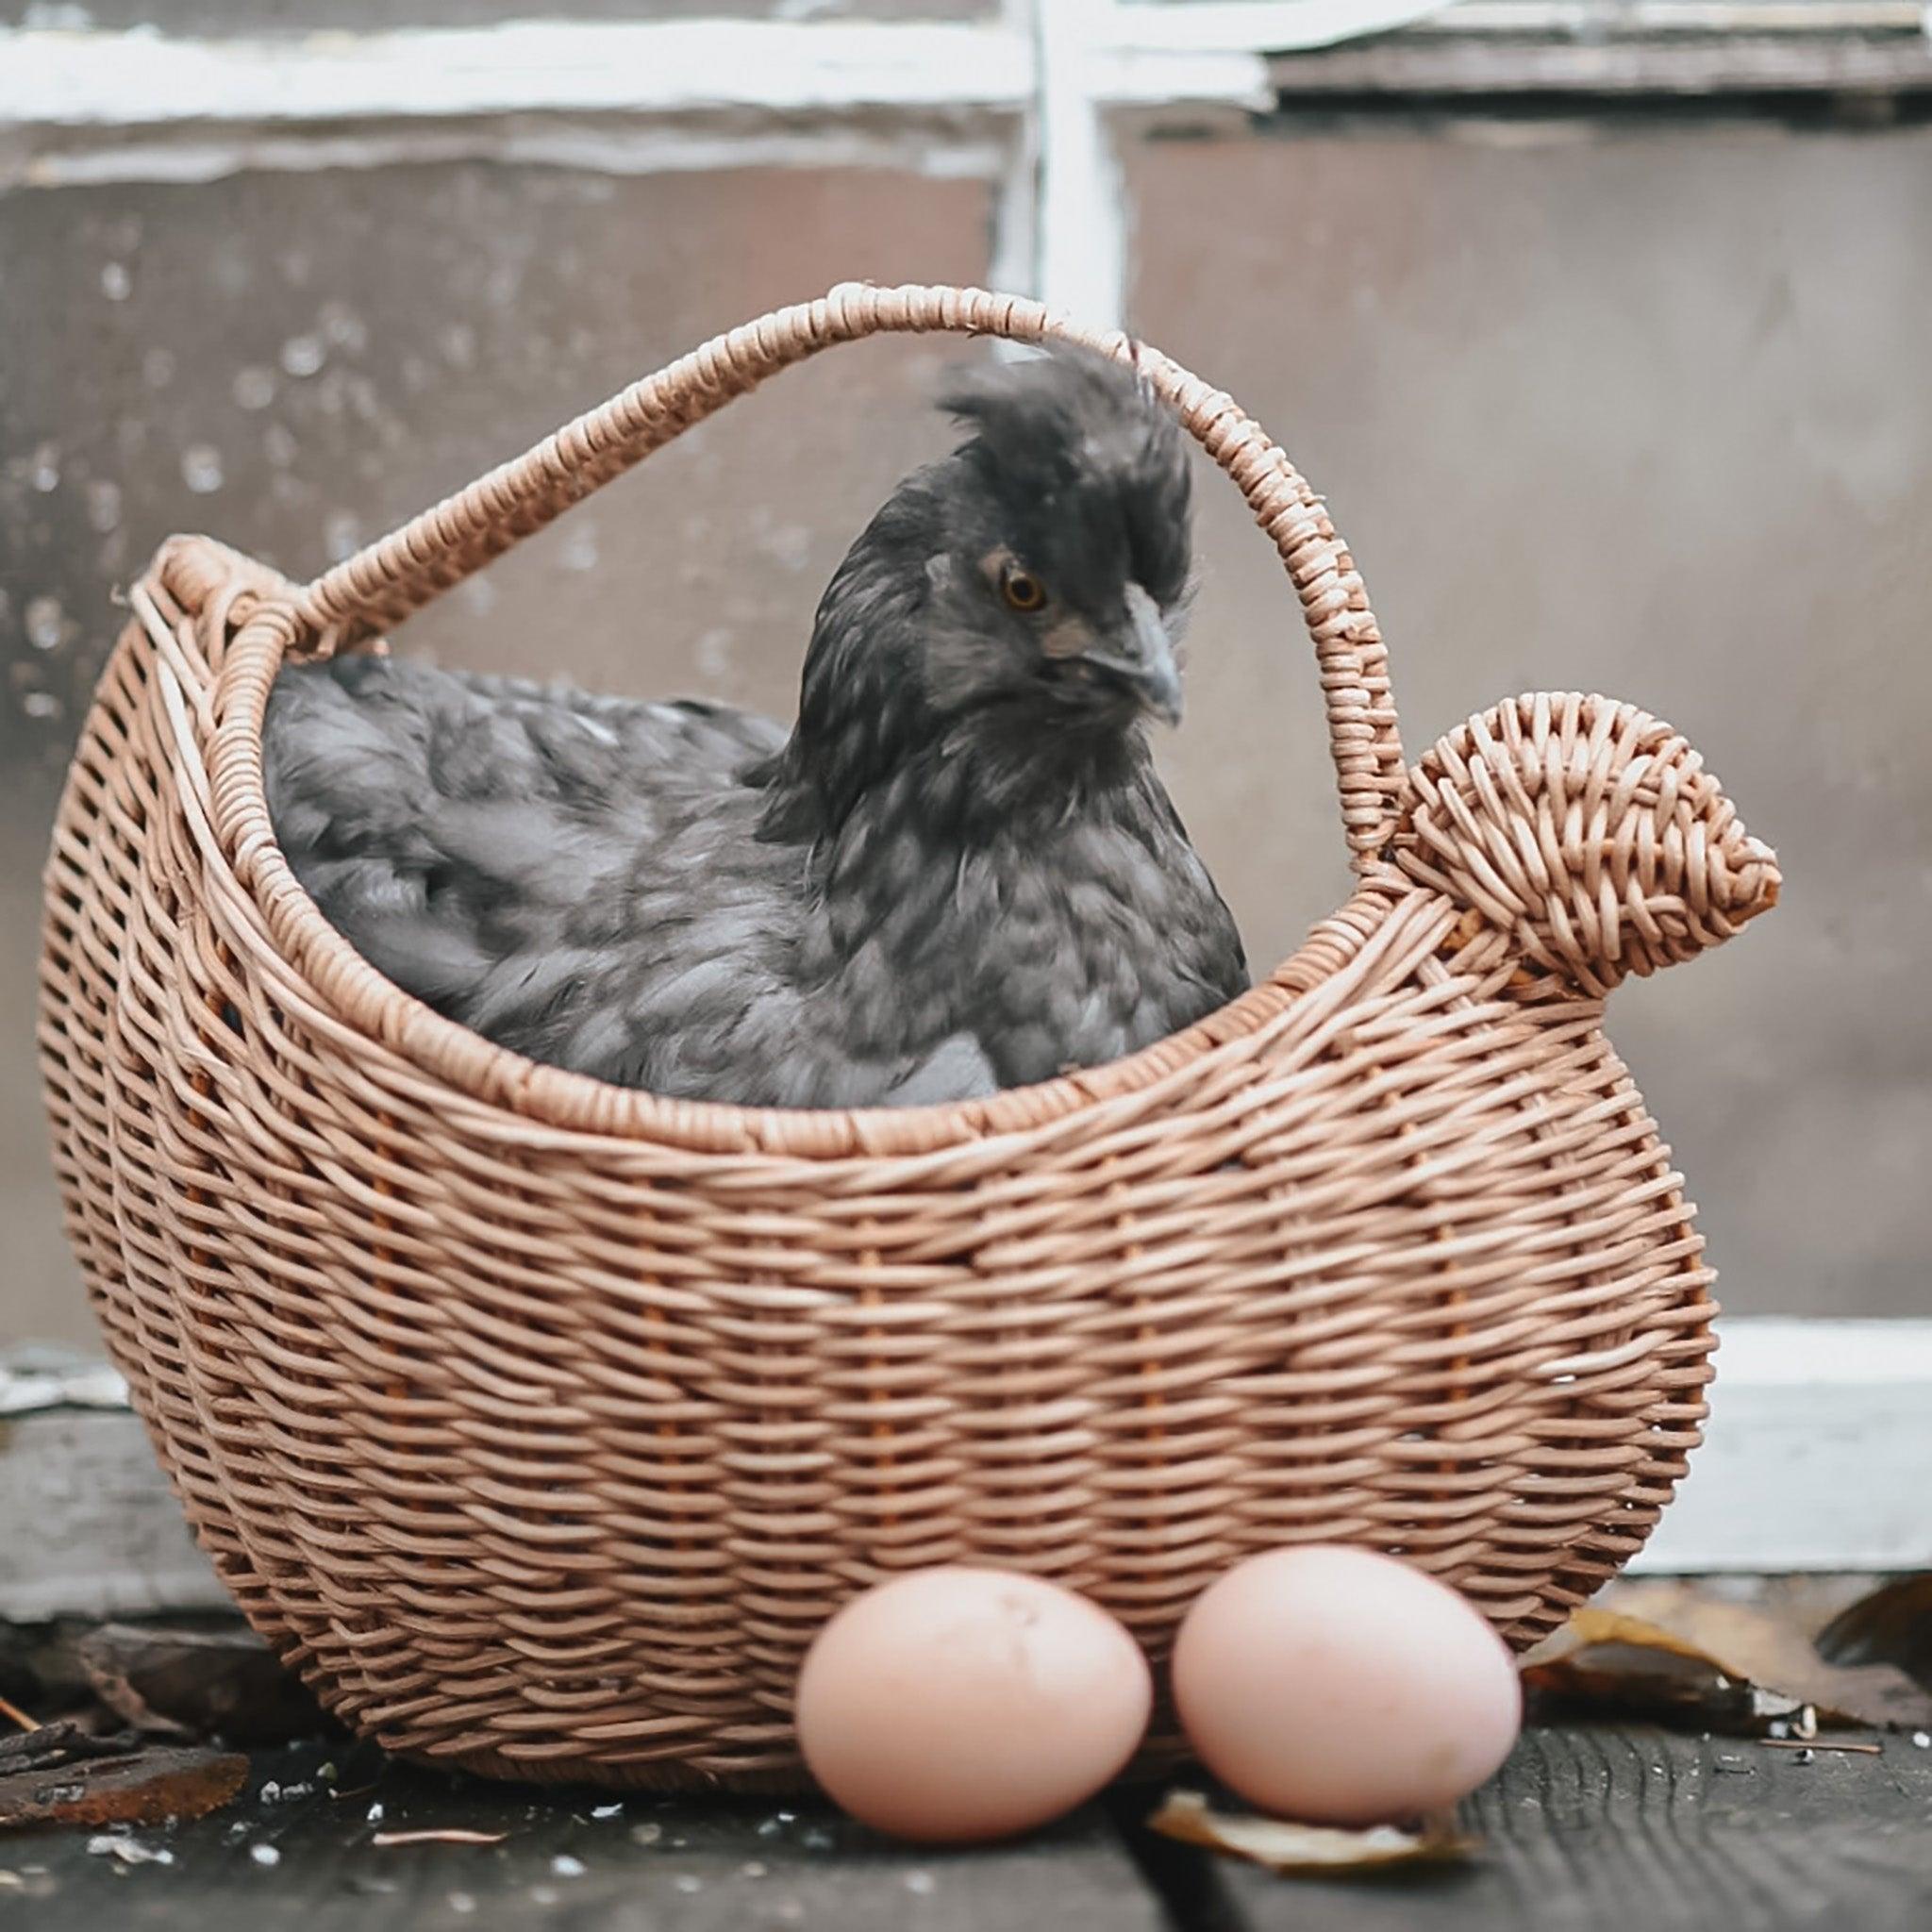 Rattan Chicken Basket - Why and Whale